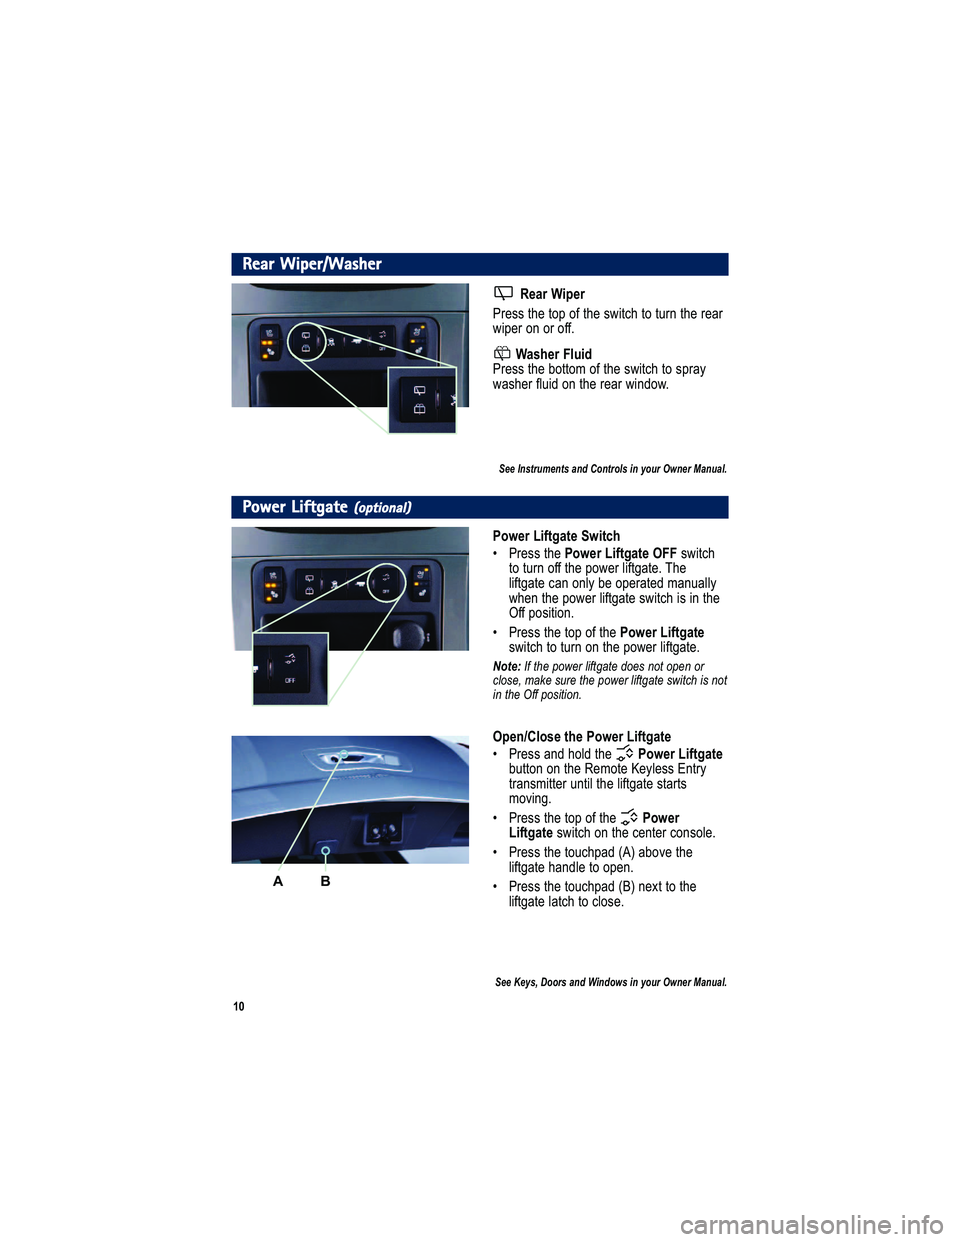 GMC ACADIA 2010  Get To Know Guide 	
Rear Wiper/Washer
! ,(8 & 07 ,8
" </ == >2 / >9 : 9 0  >2 /  = A 3> - 2  >9  >? <8  >2 / < / + <
A 3: /< 9 8 9 < 9 00 
& (9/ ,8  3; 0+  
" </ == >2 / , 9>>9 7  9 0  >2 / = A 3> - 2  >9  = : <+ C
